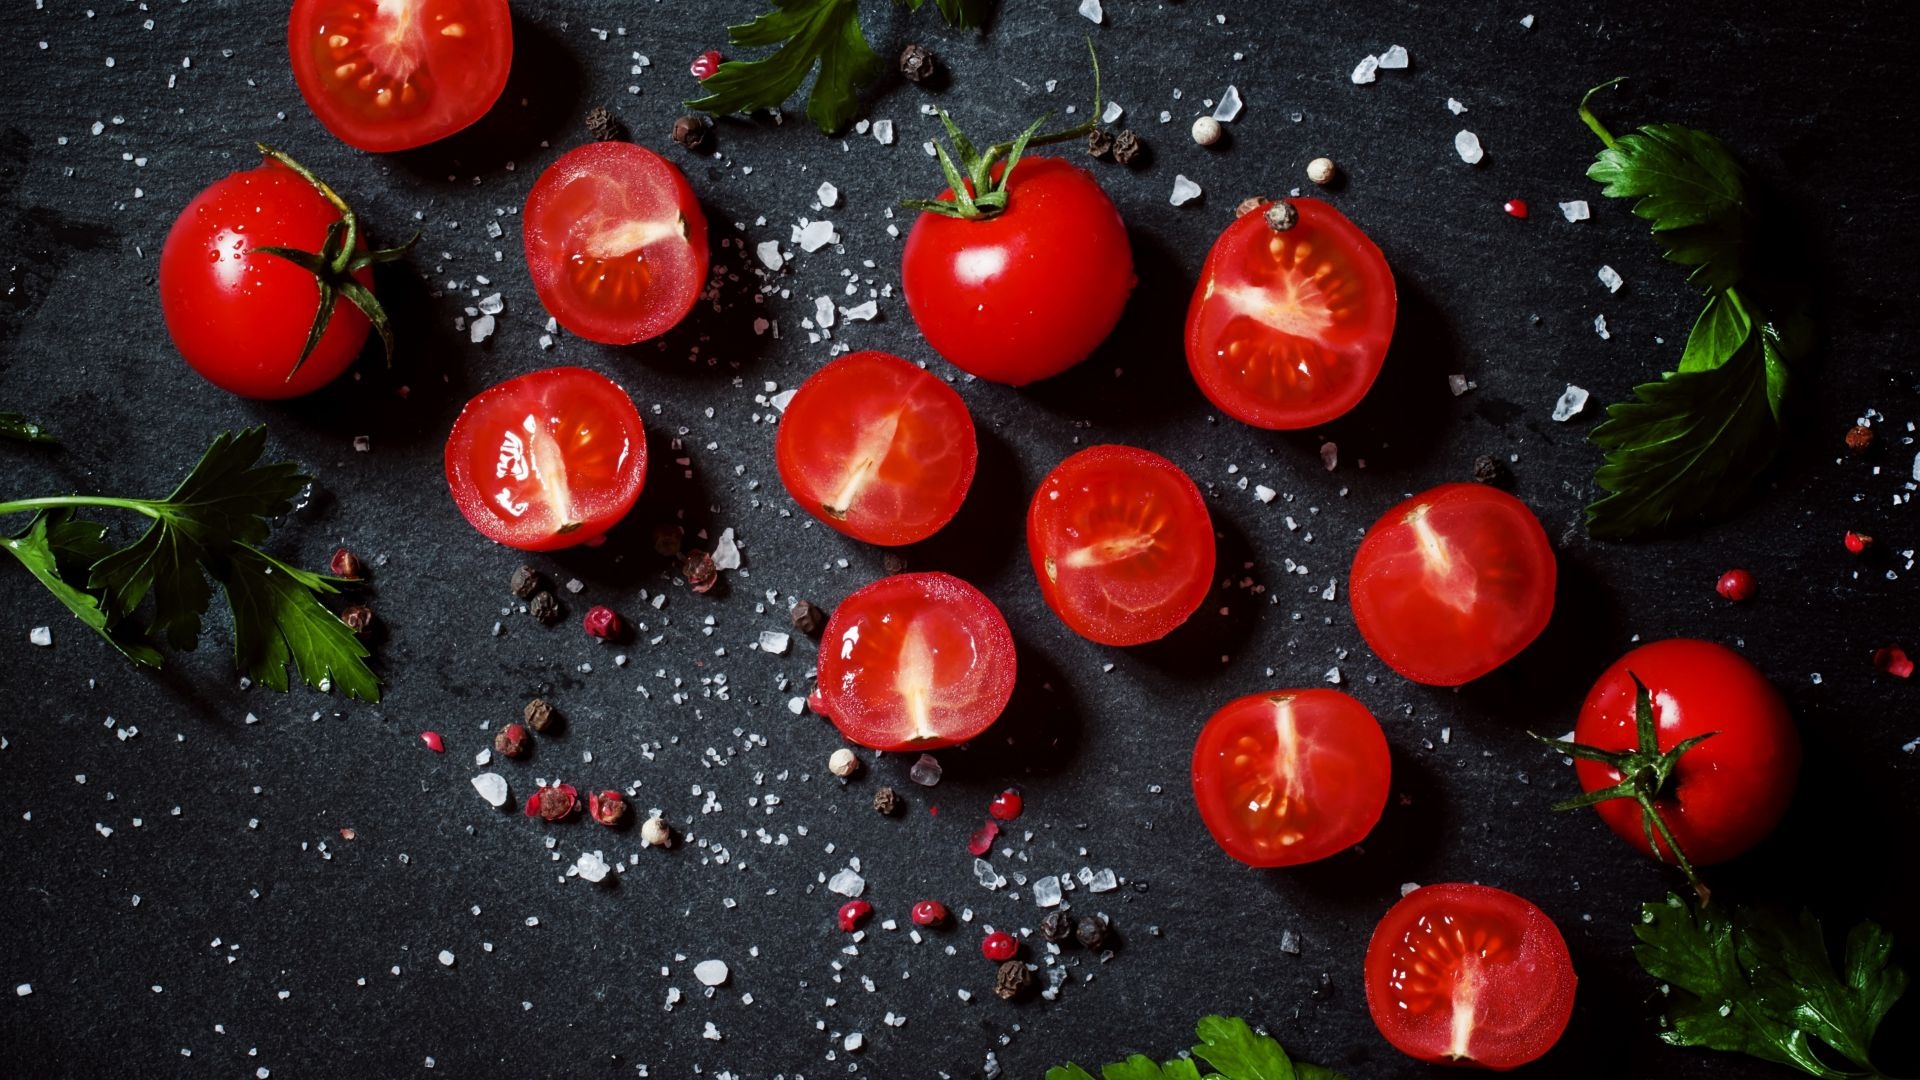 Tomato vegetables in kitchen, Wallpaper HD image, Background picture, WallpaperMug, 1920x1080 Full HD Desktop